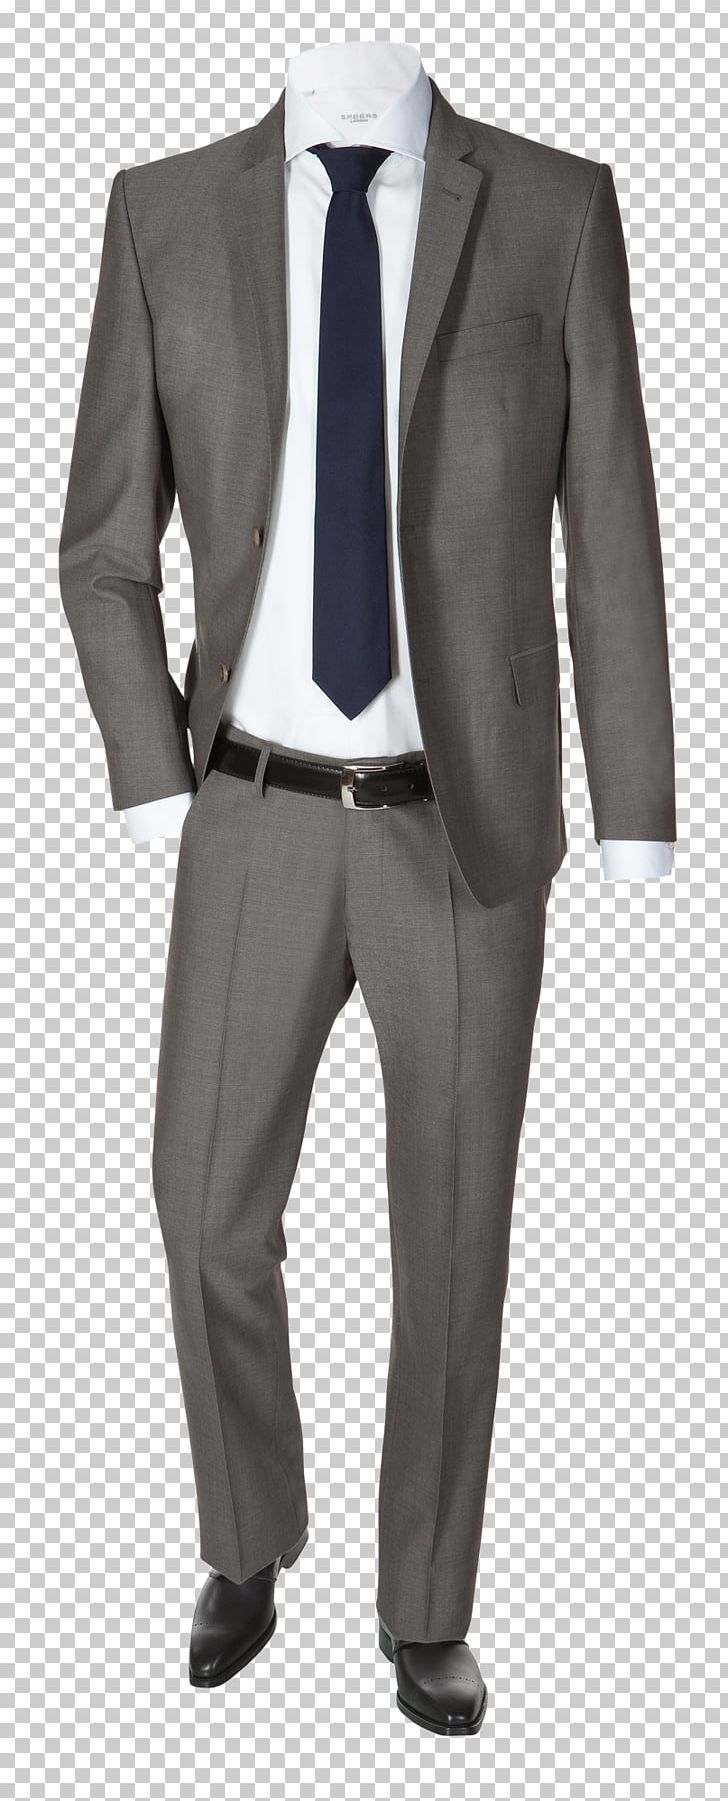 Tuxedo Suit T-shirt Clothing Mens ONLY & SONS PNG, Clipart, Blazer, Chino Cloth, Clothing, Coat, Fashion Free PNG Download